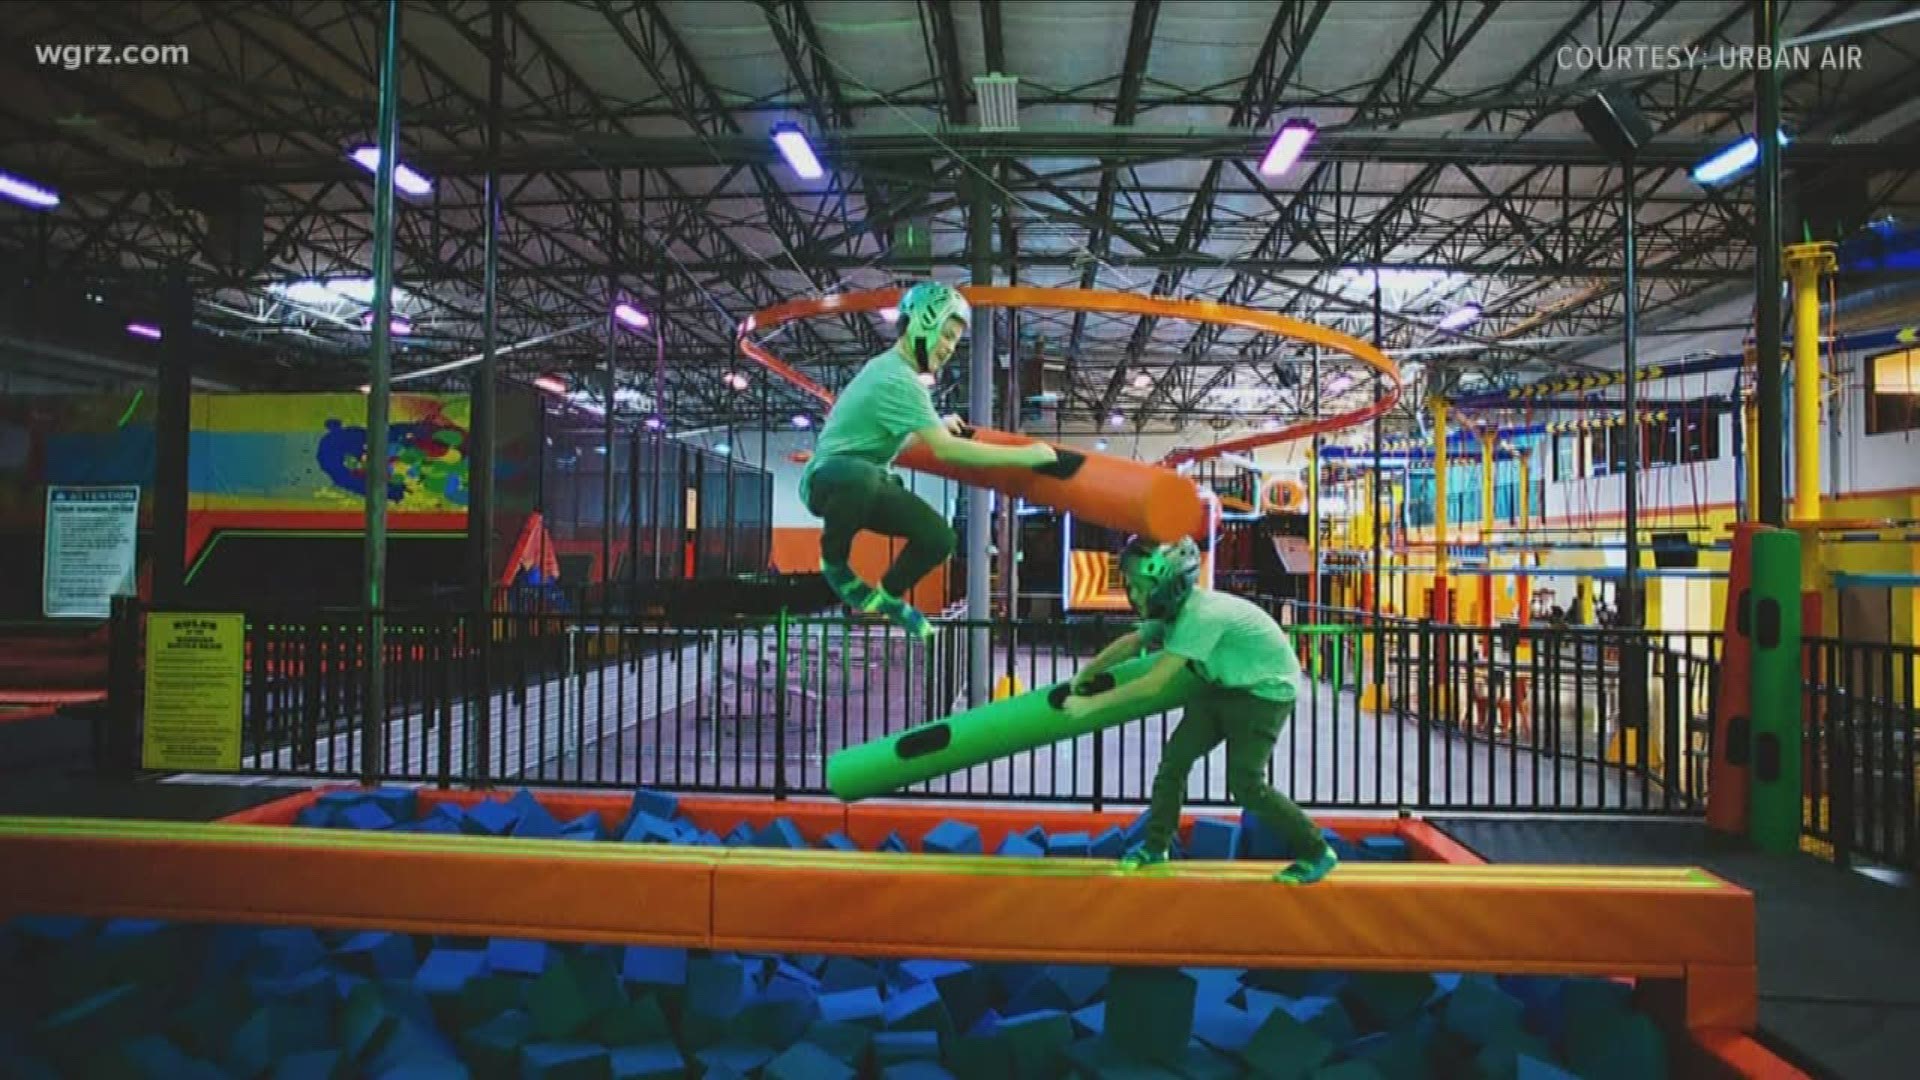 Urban Air Adventure park will open a 50 thousand square foot indoor facility in the Walden Galleria this winter.